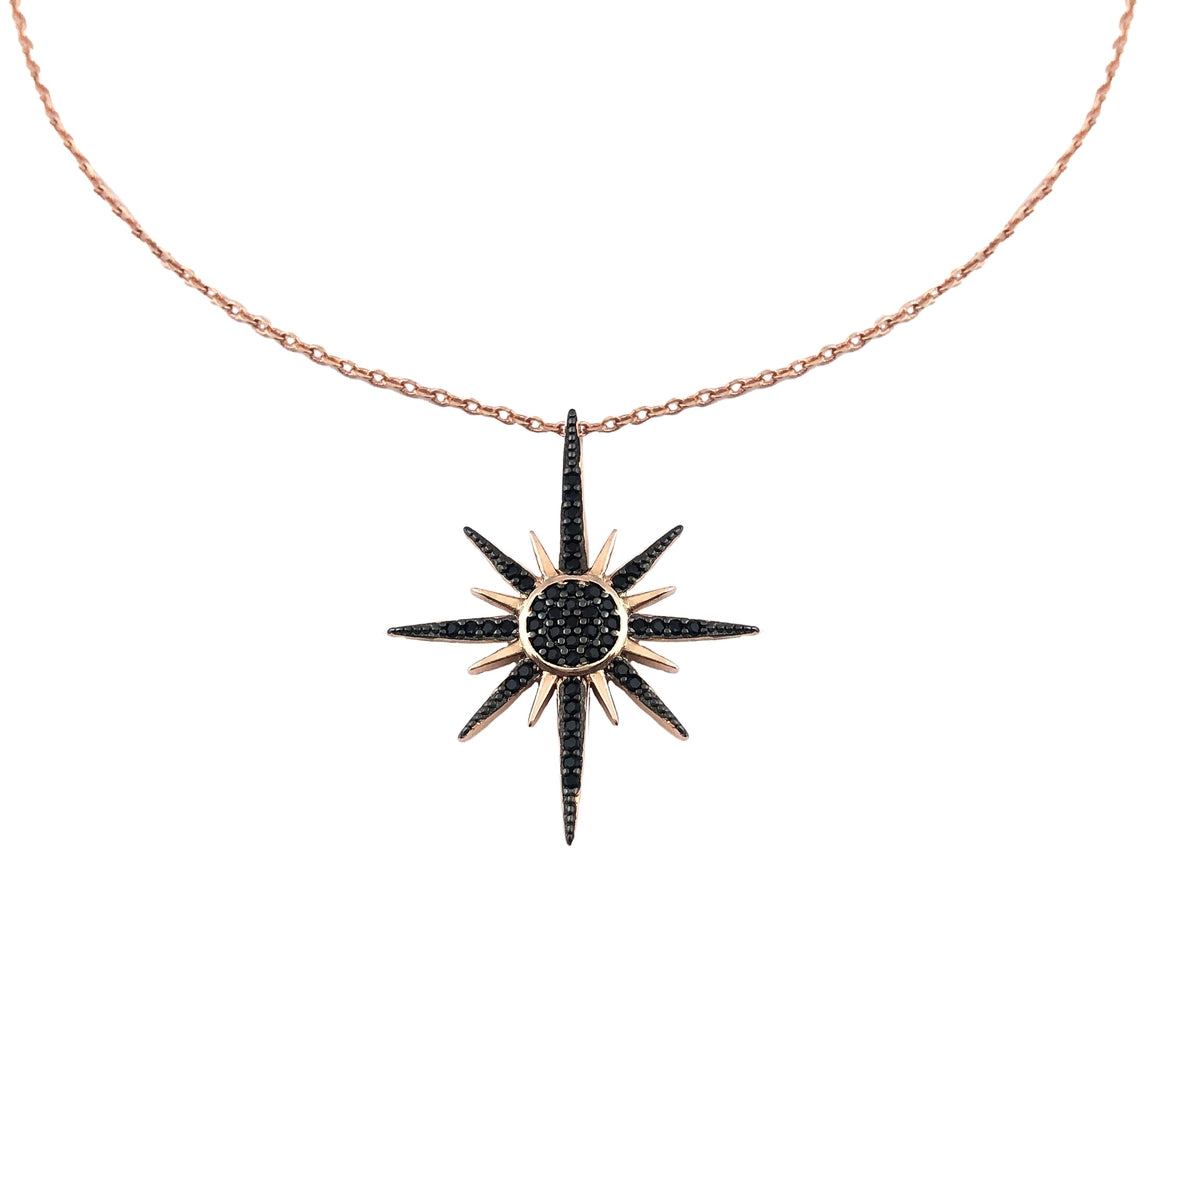 Authentic Northern Star Casual Necklace